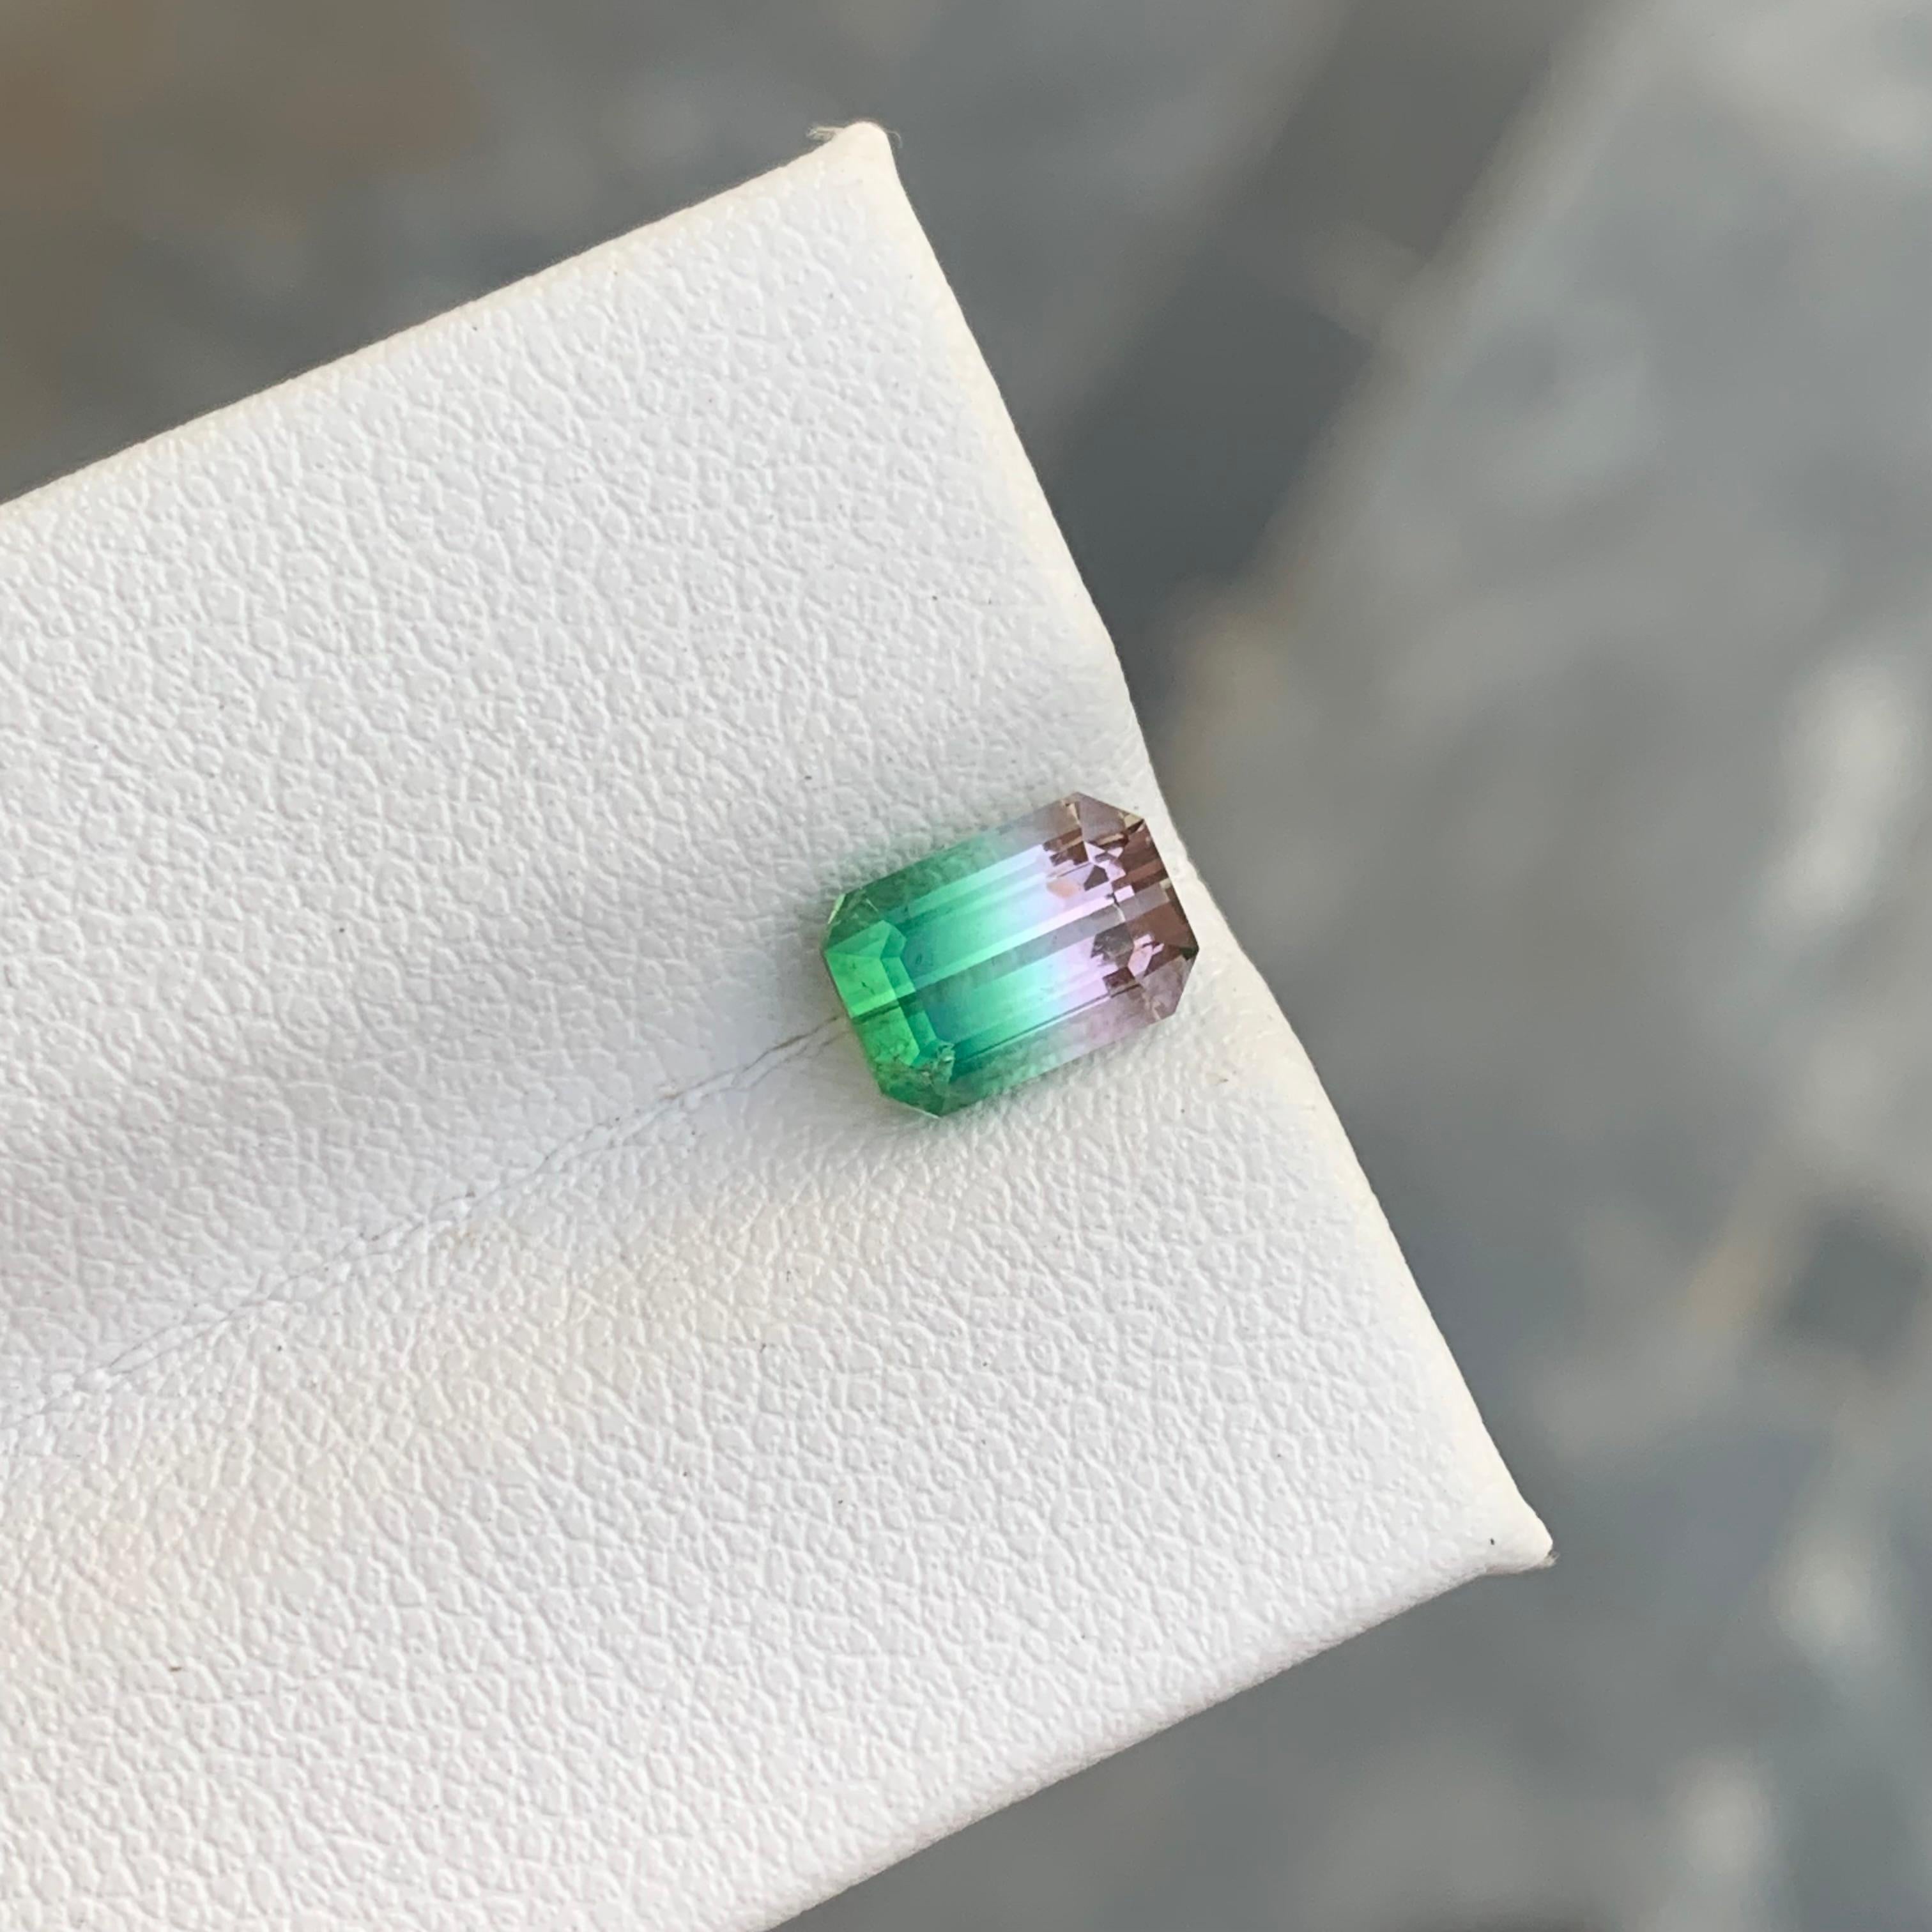 Women's or Men's Gorgeous 1.60 Carat Loose Bicolor Tourmaline From Afghanistan For Ring